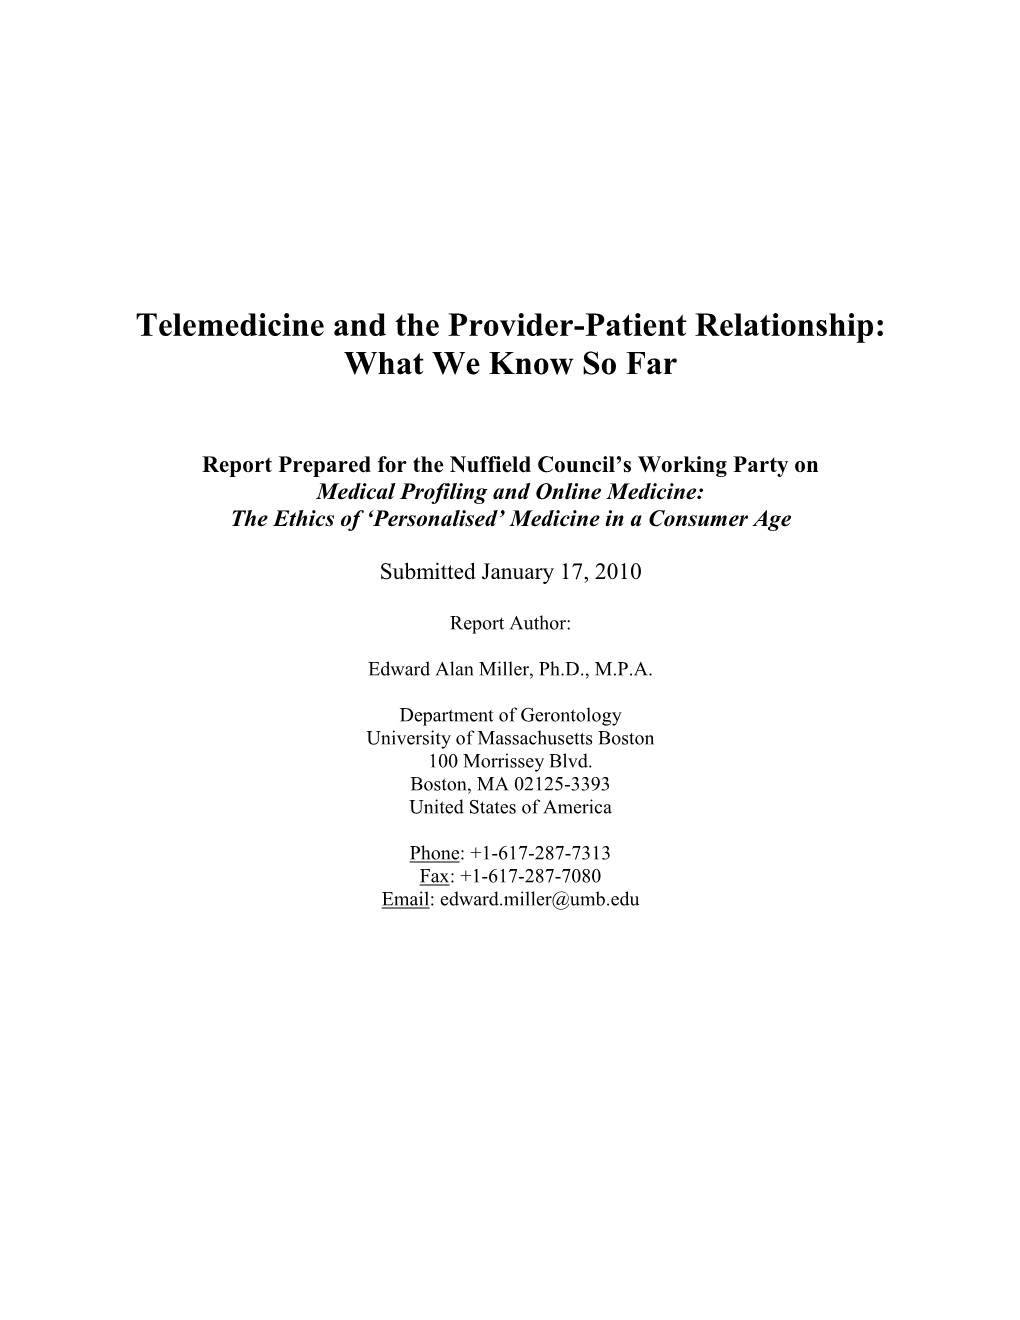 Telemedicine and Doctor-Patient Communication: an Analytical Survey of The